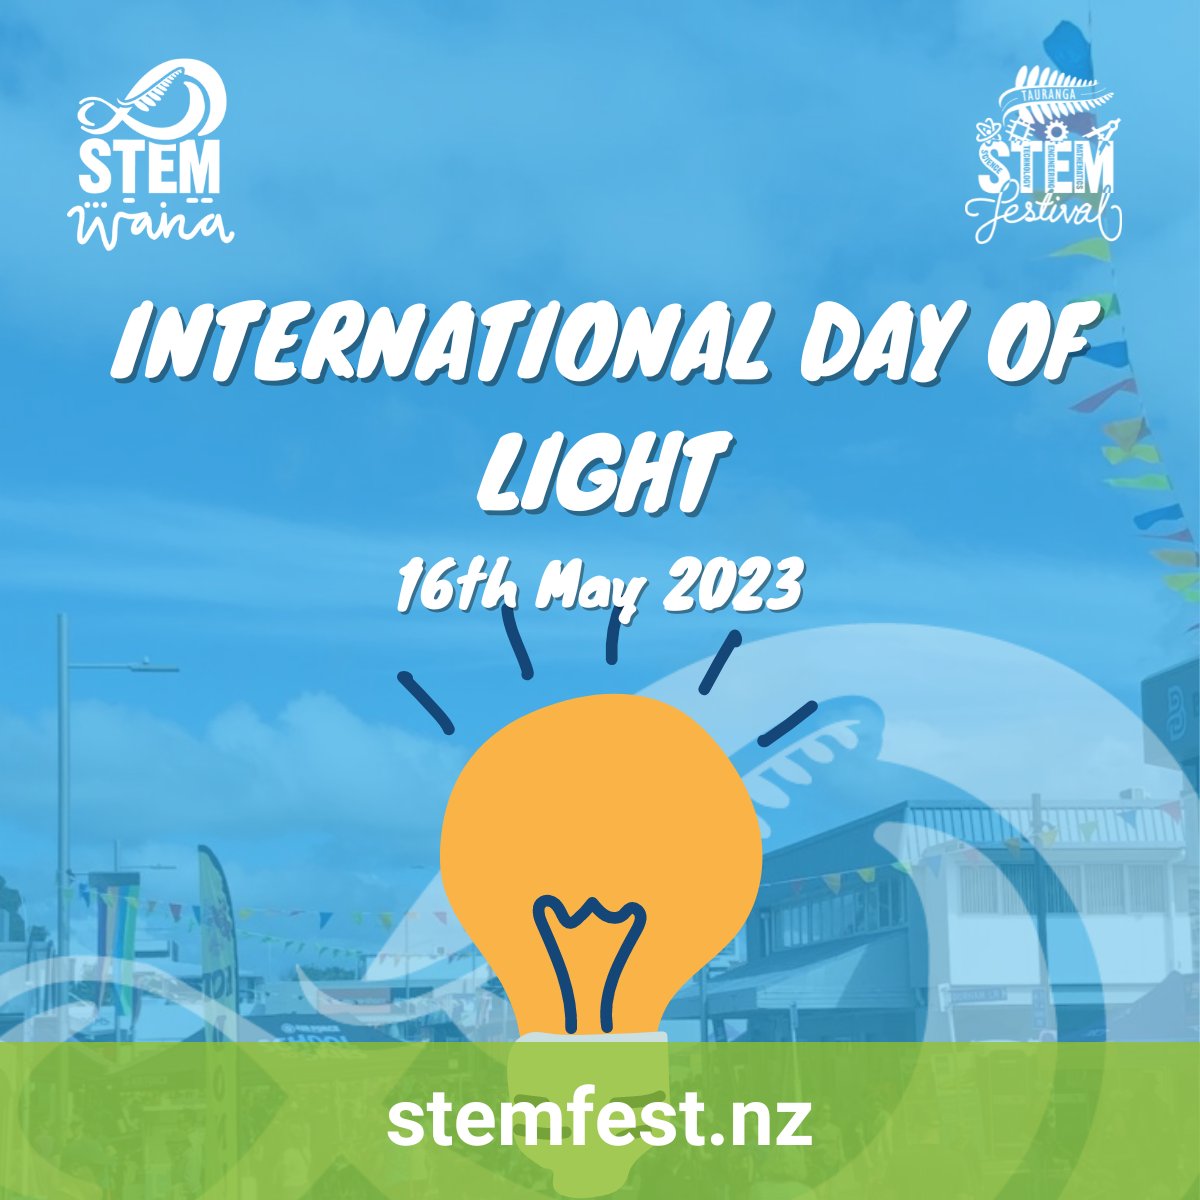 The International Day of Light is a worldwide initiative created to highlight the appreciation of light 💡 It plays a huge role in STEM industries and more. How is light present in your day? How does it make your life easier? #lightisthefuture #internationaldayoflight #stemcareer